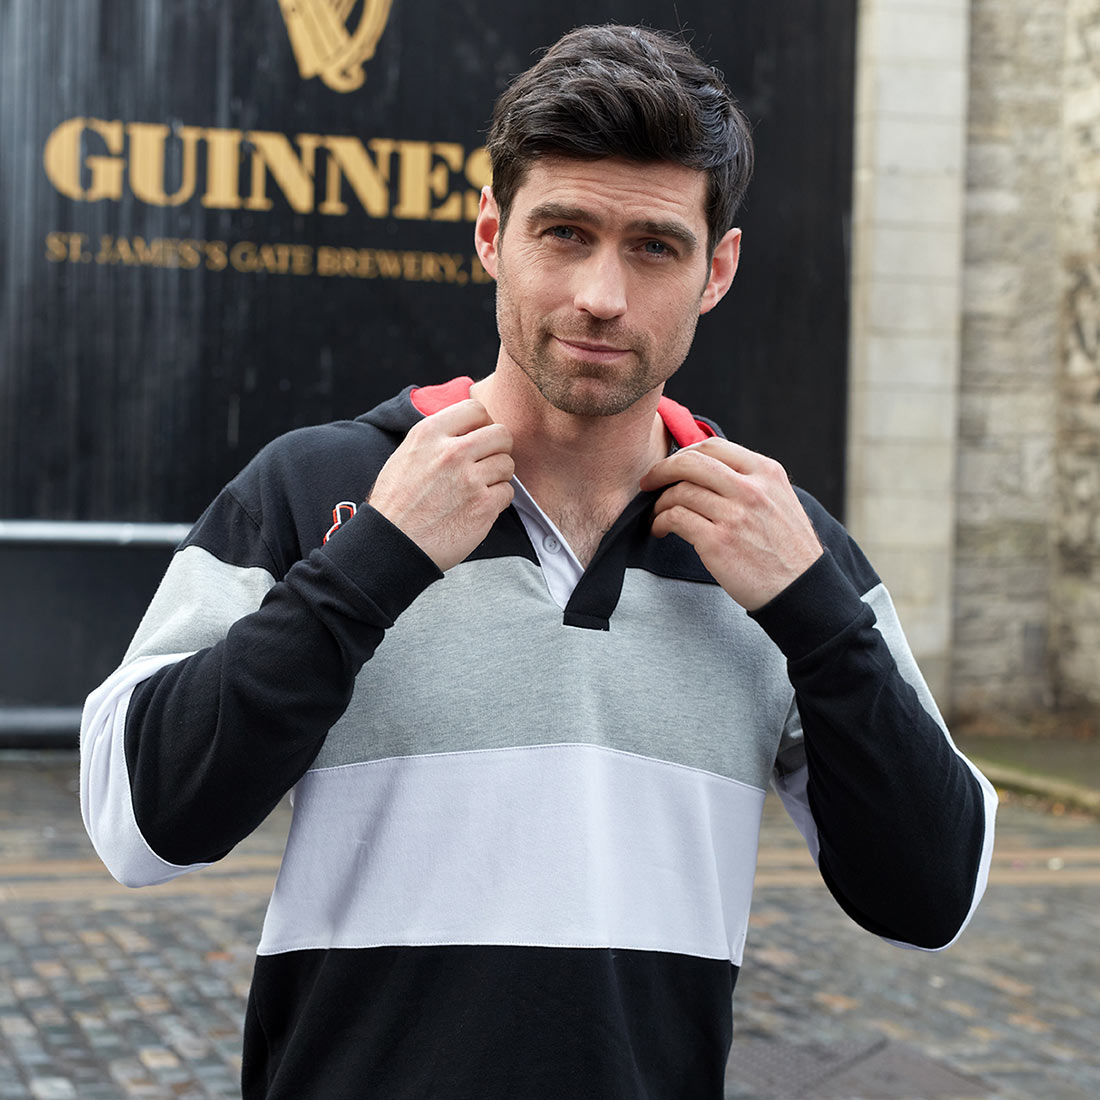 A hooded man is posing in front of a Guinness UK Black & Red Toucan Hooded Rugby sign.